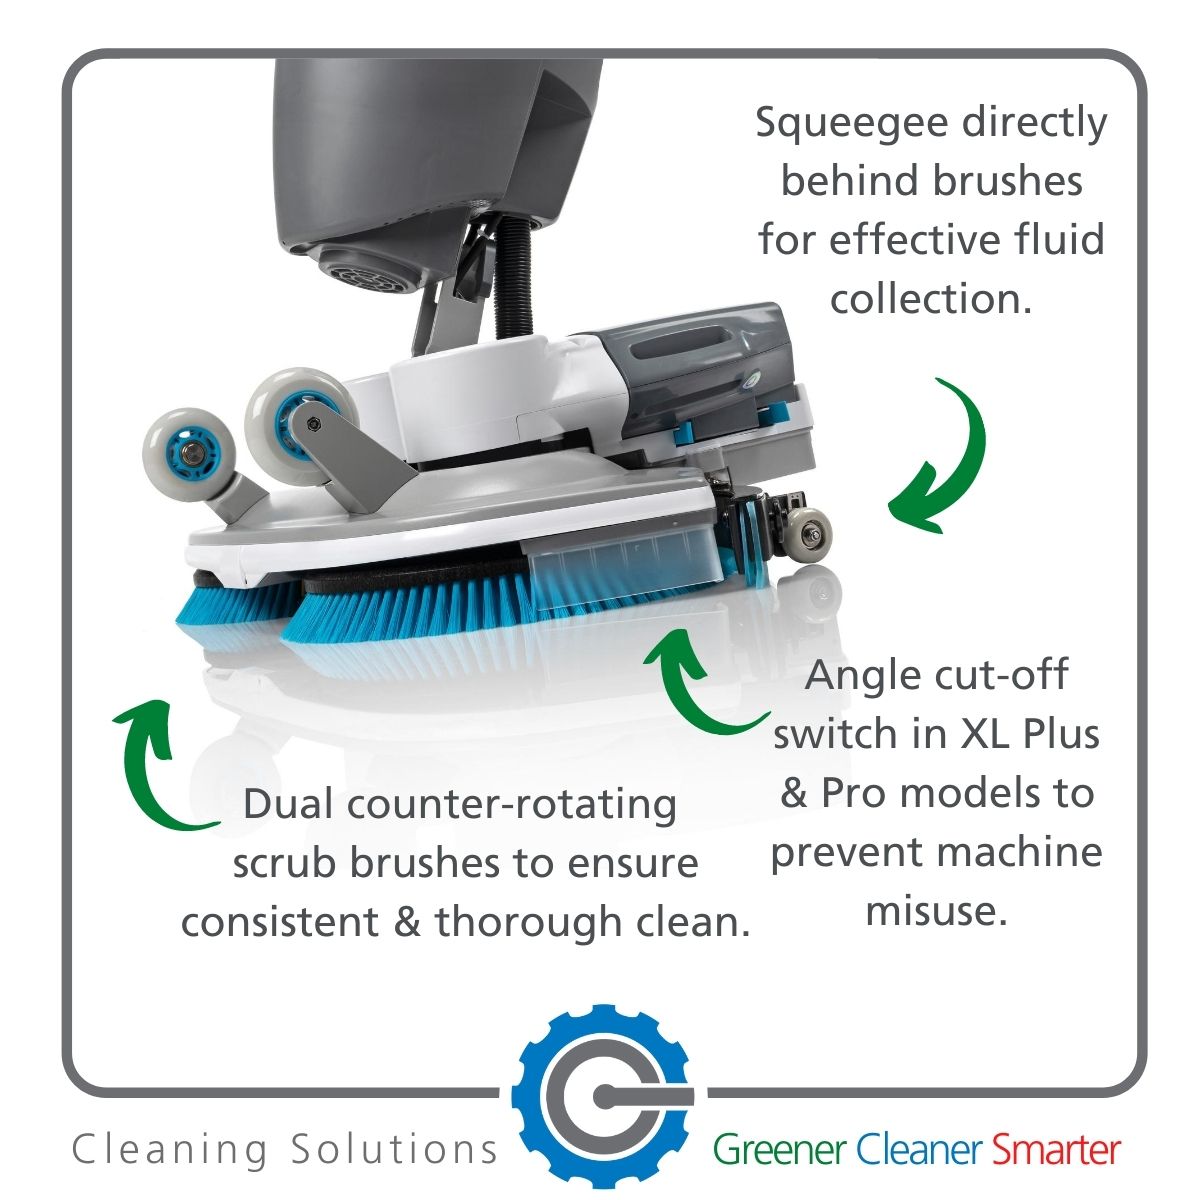 i-mop product features #2 - squeegee, angle cut-off switch, counter rotating scrub brushes